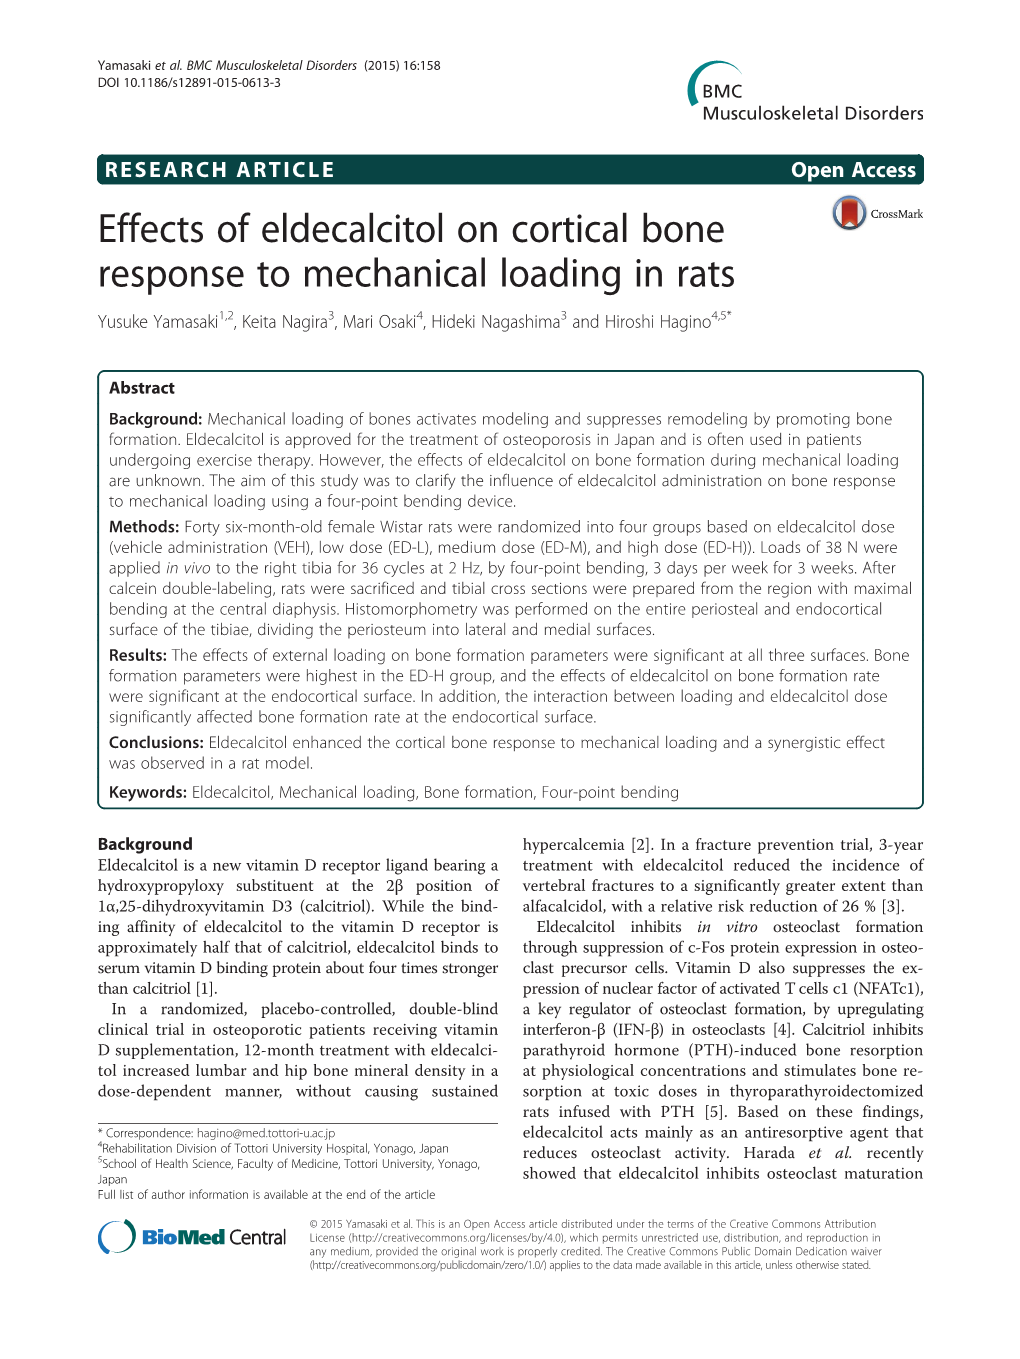 Effects of Eldecalcitol on Cortical Bone Response to Mechanical